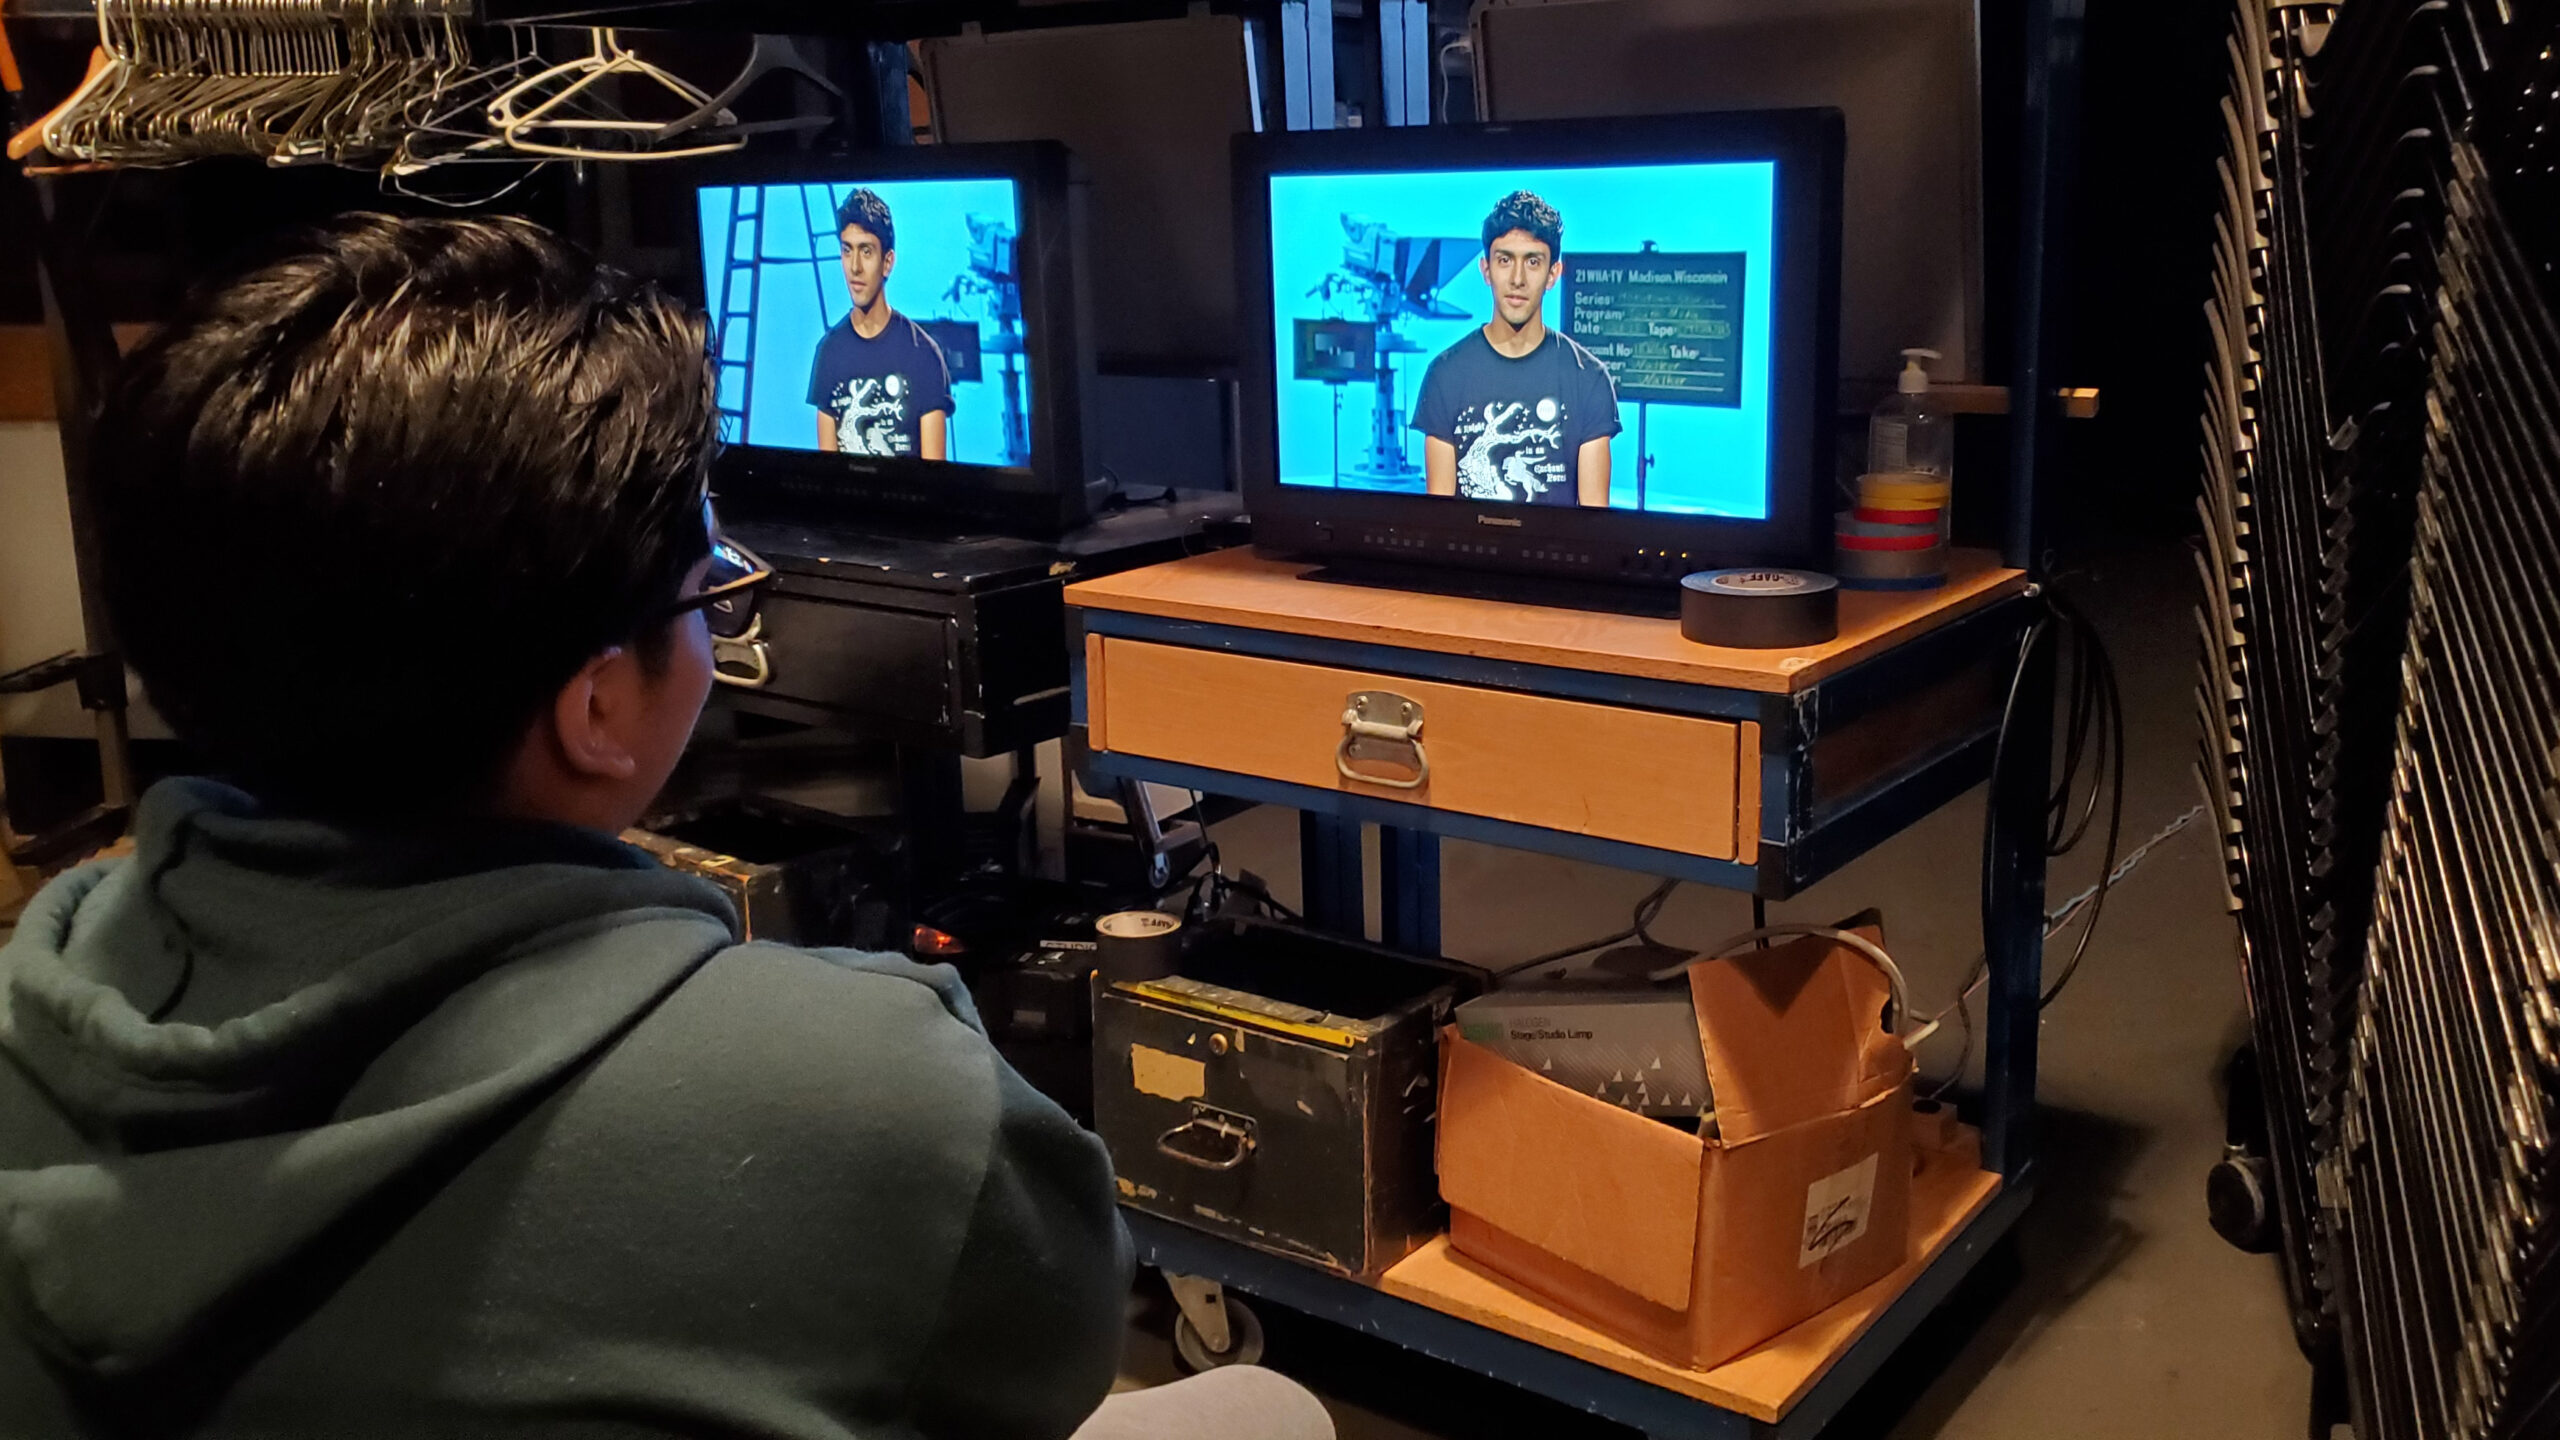 A high school student watches monitors showing another student in a production studio.